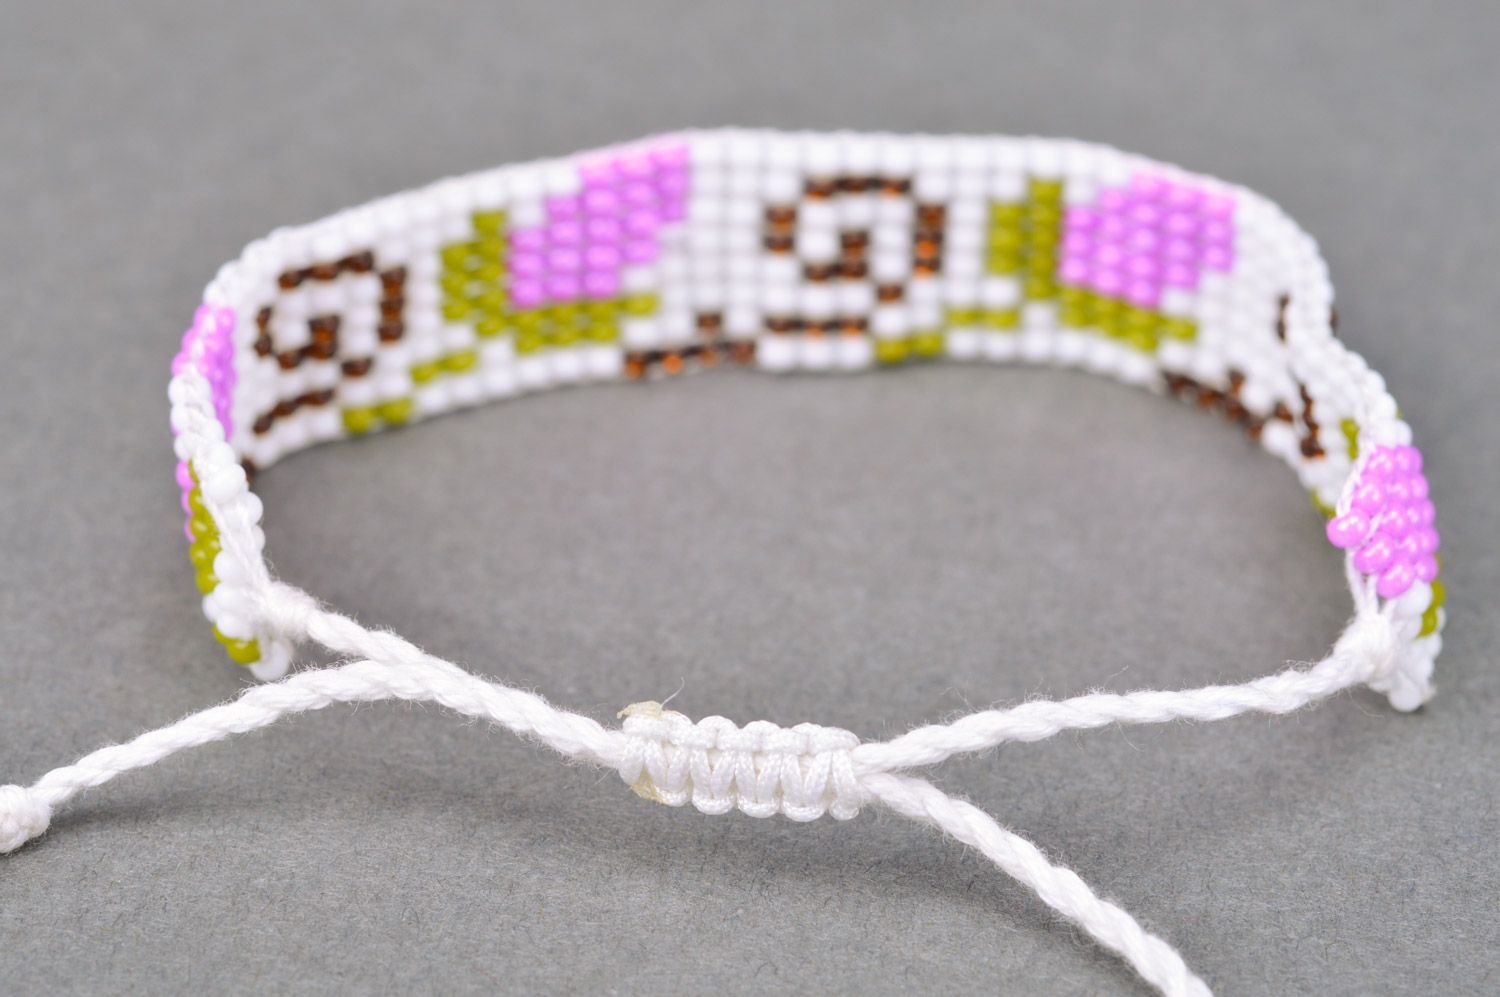 Stylish handmade women's wrist bracelet woven of beads and threads of light color with flower pattern photo 5